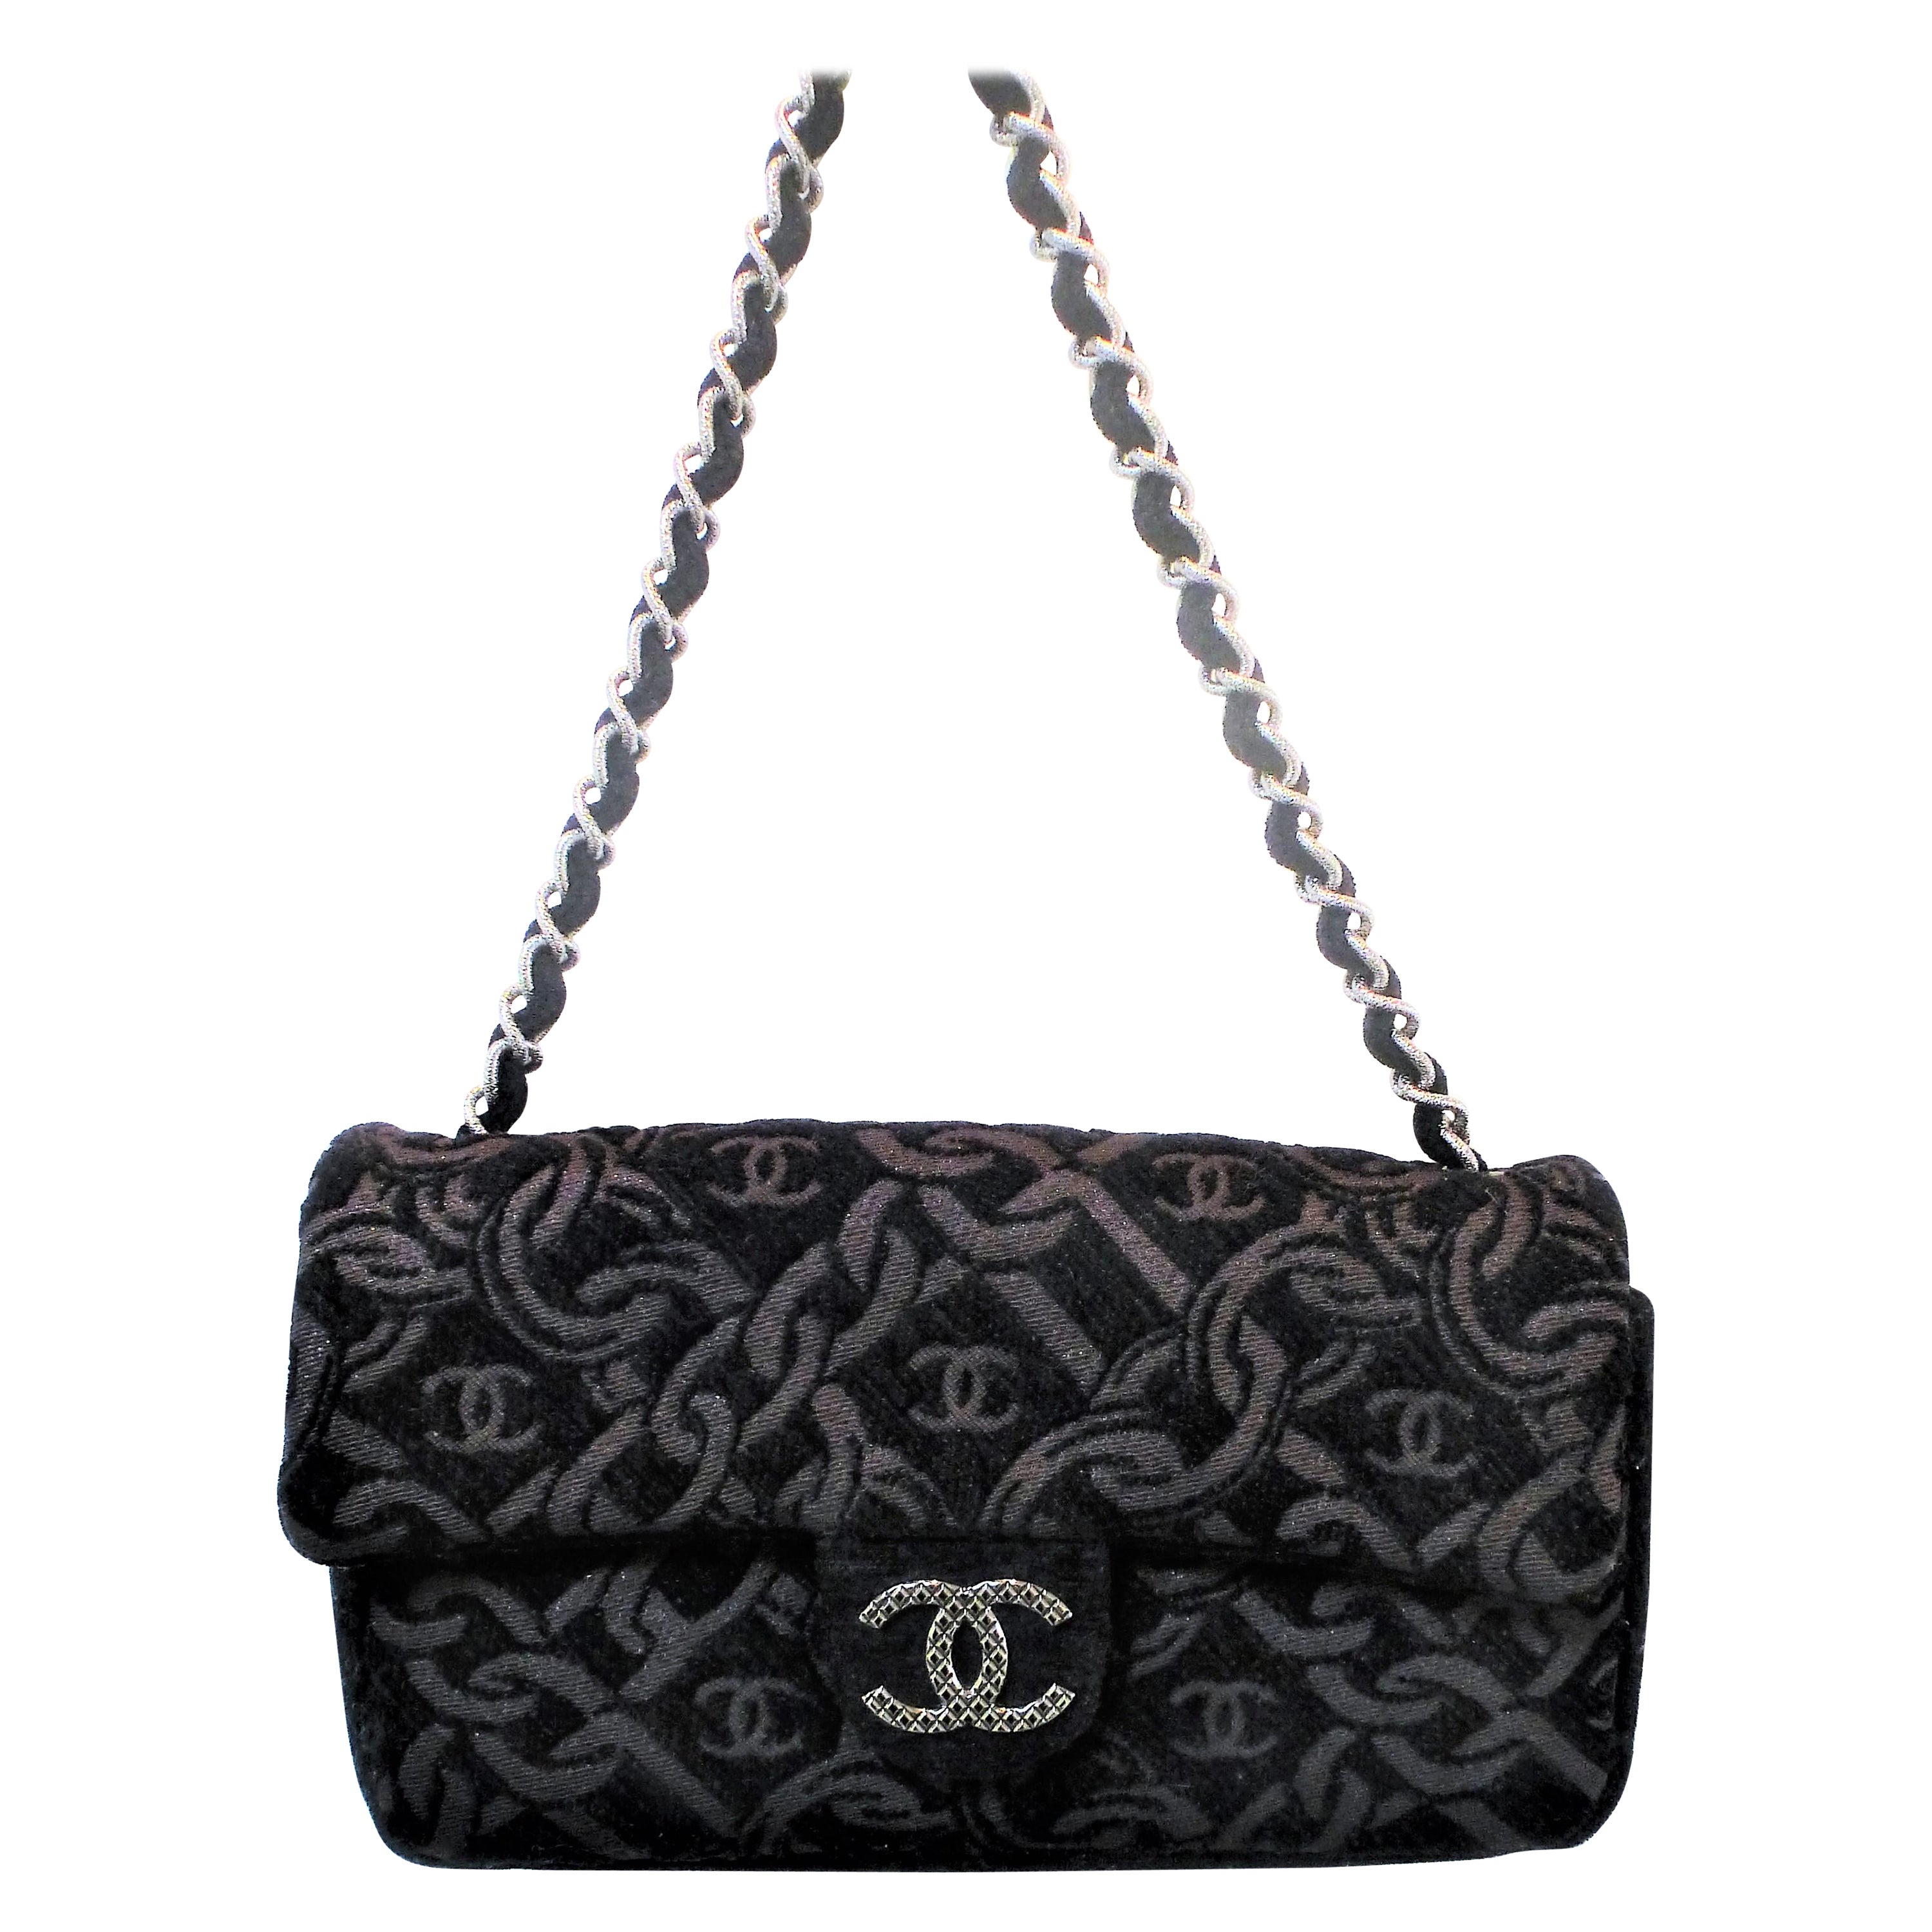 Chanel Evening Bag Made of Black Jacquard Fabric, Woven Chanel Chain and Logo!